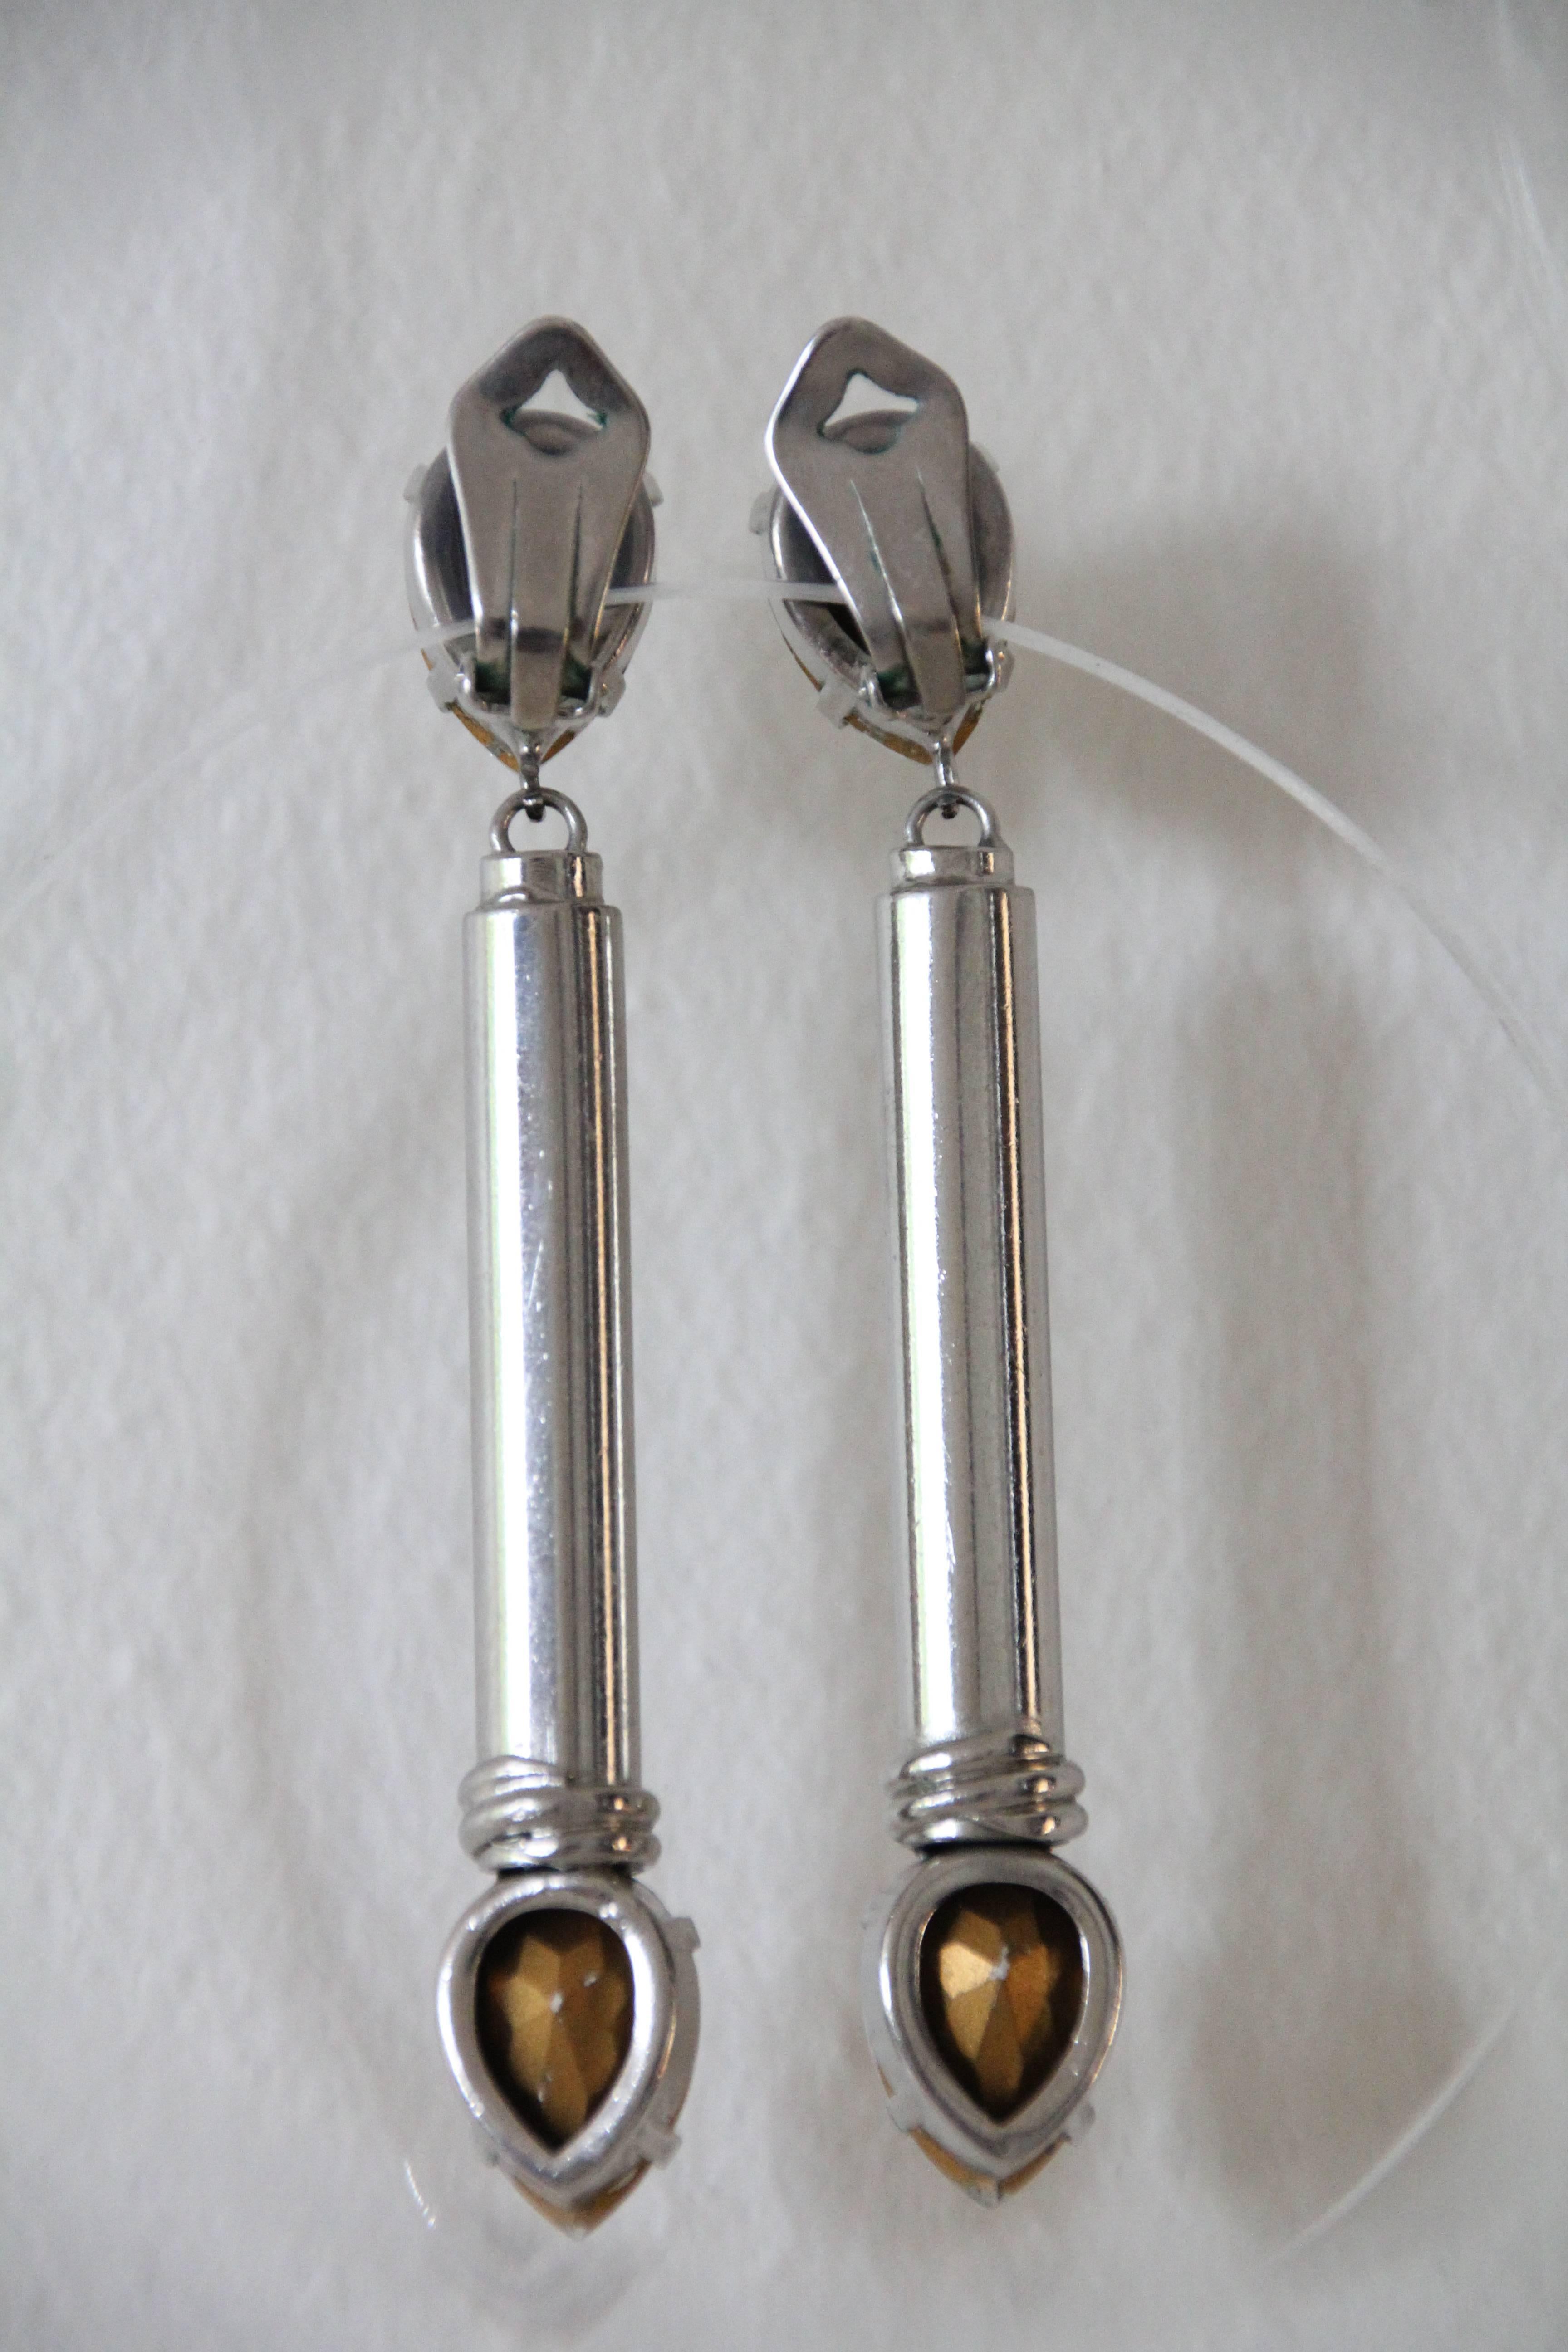 A wonderful 1980s pair of stainless steel Modernist dangle clip earrings with a pear shaped rhinestone at each end. A dramatic statement piece at 3.5